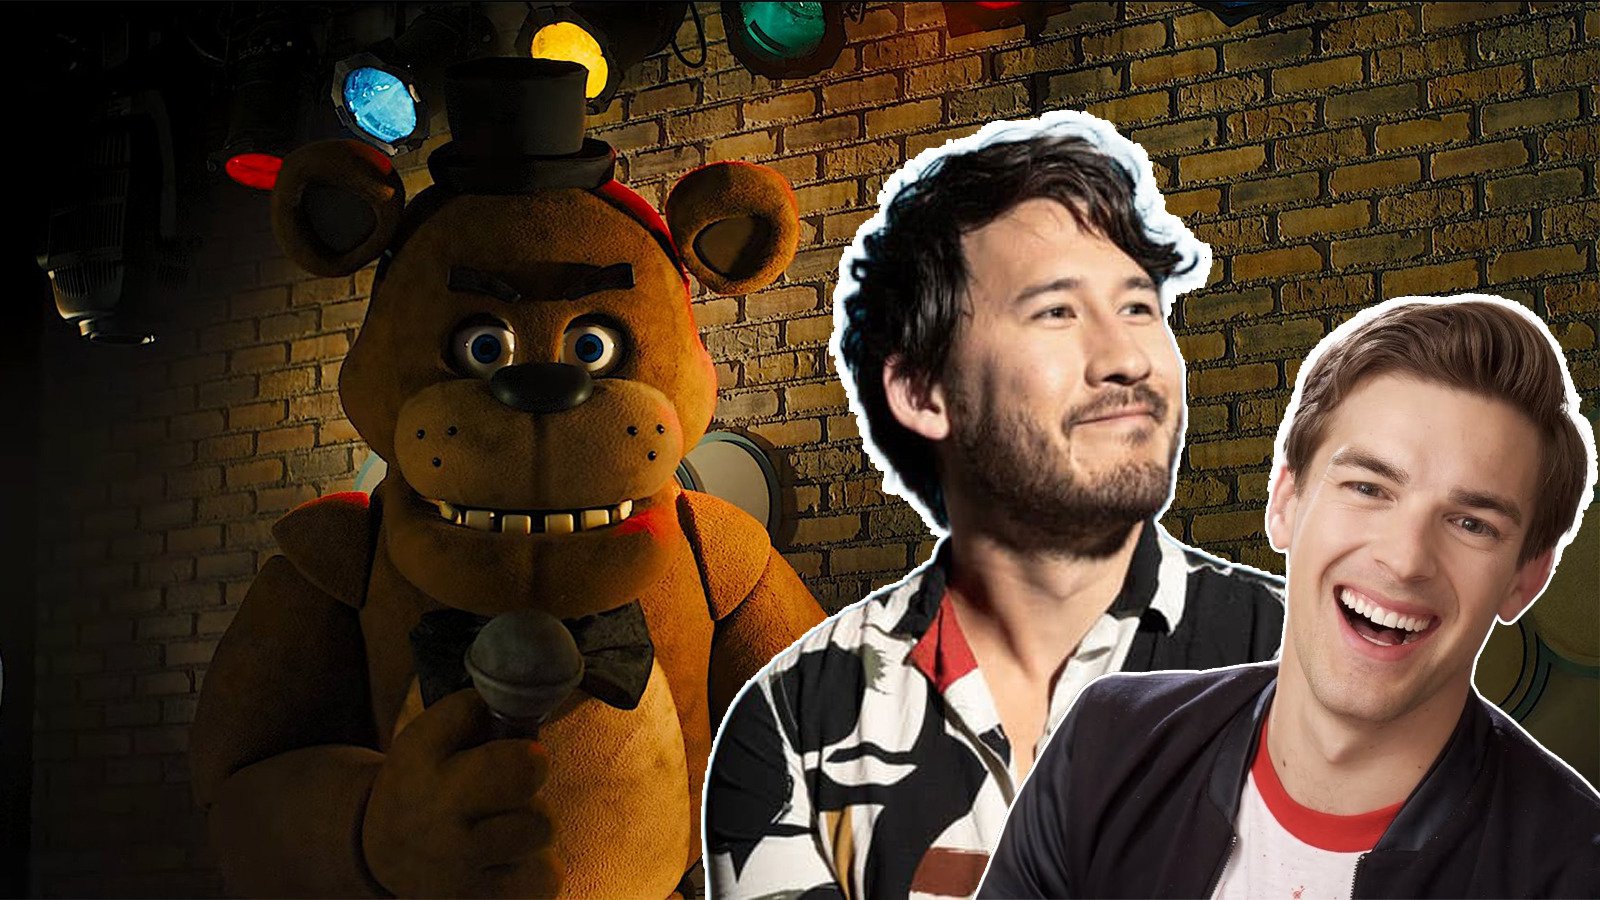 Review: Five Nights at Freddy's is a film lovingly dedicated to